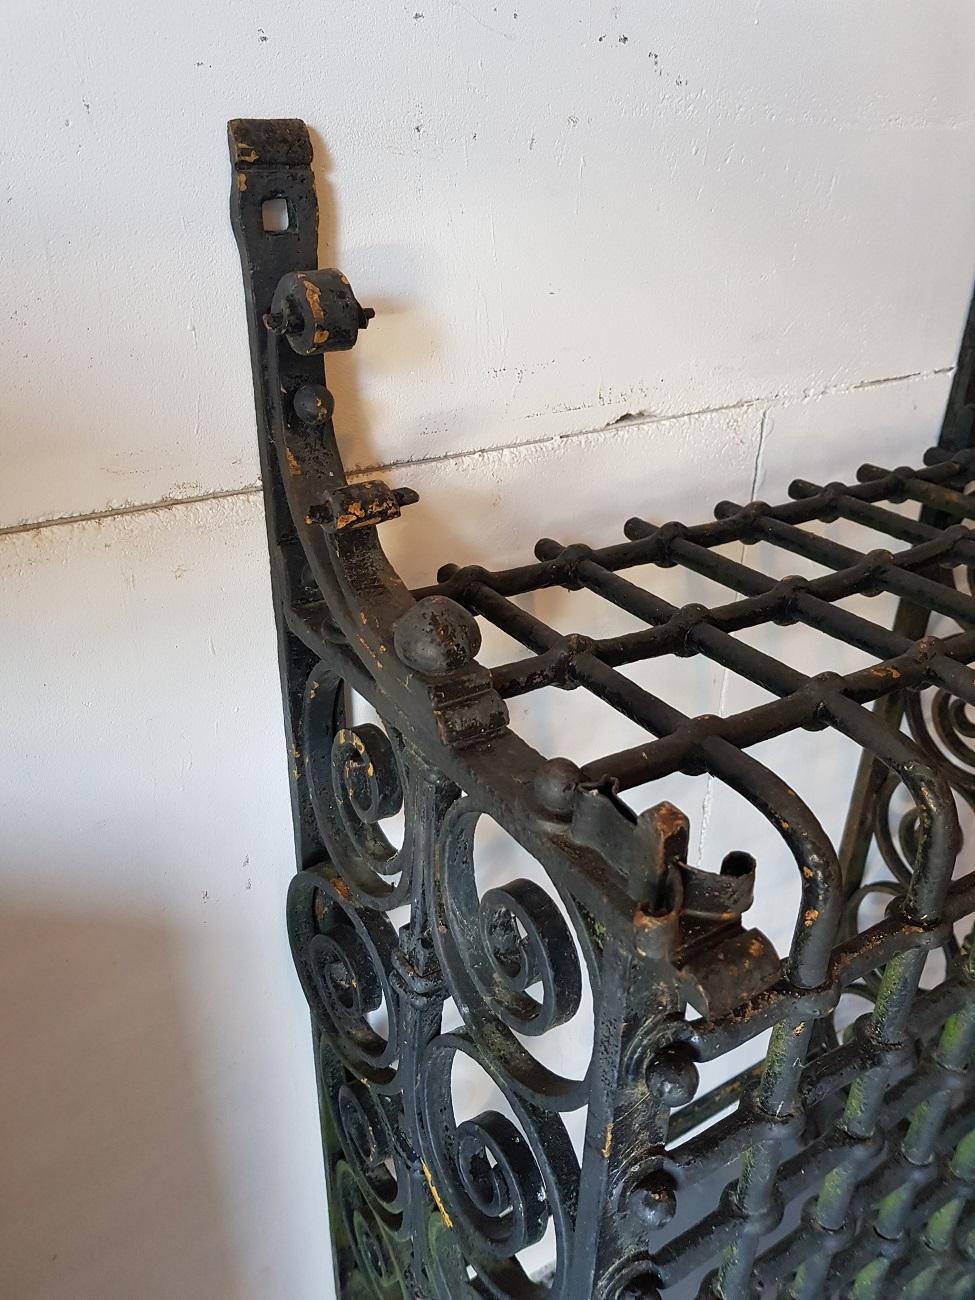 19th century French wrought iron window bars and braided with graceful curls, really a beautiful piece of craftsmanship from the 19th century and it's heavy.

The measurements are:
Depth 30.5 cm/ 12 inch.
Width 52 cm/ 20.4 inch.
Height 87.5 cm/